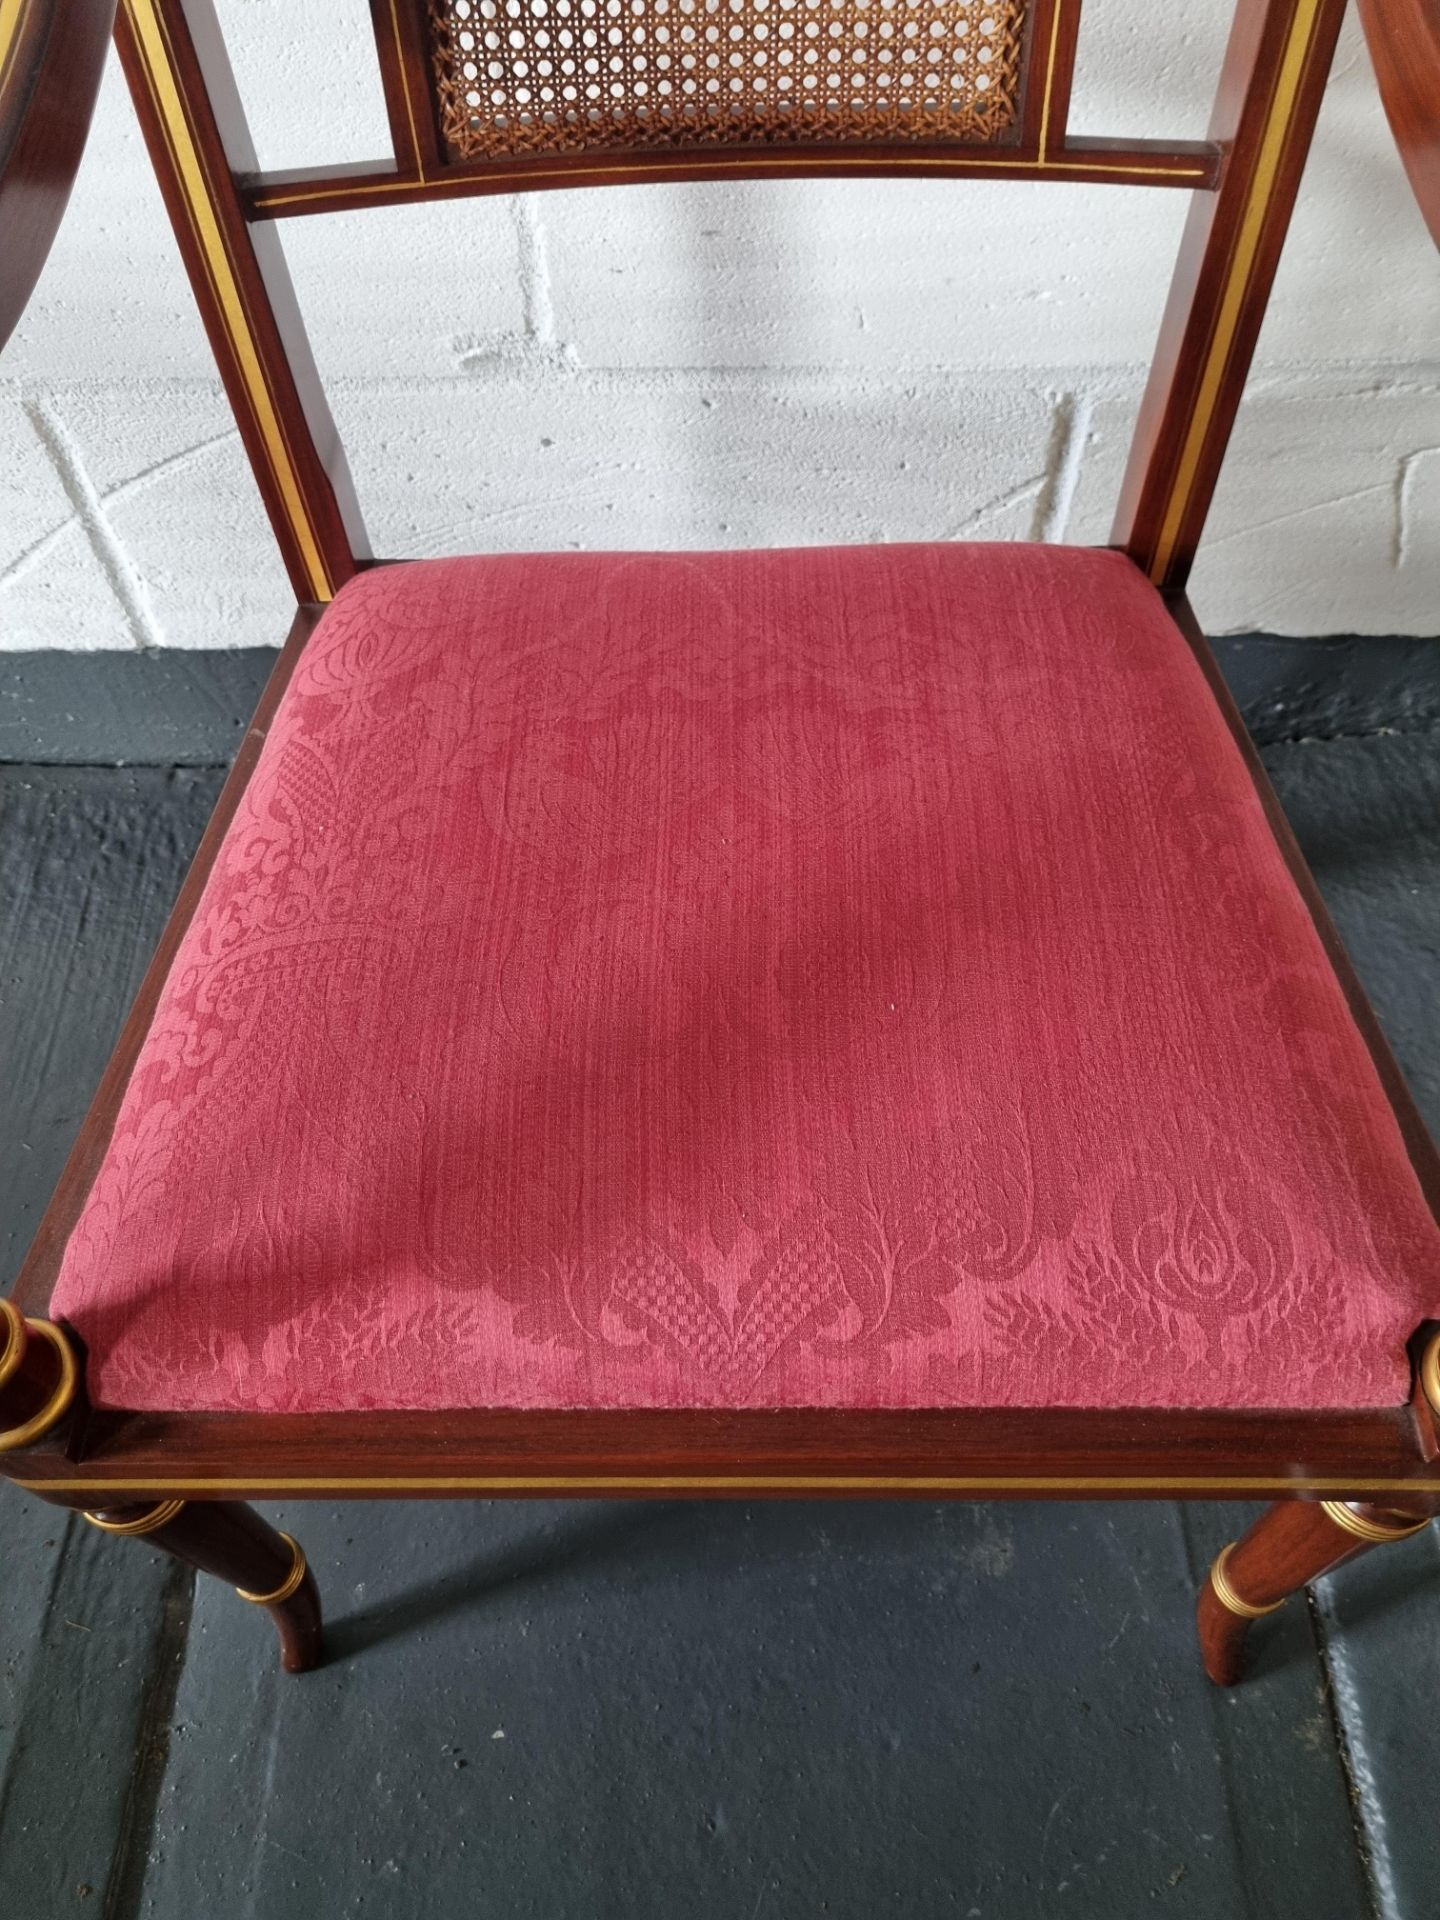 Arthur Brett Arm Chair Regency-Style Chair Bespoke Red Unupholstered In Rosewood Colour Finish - Image 2 of 4